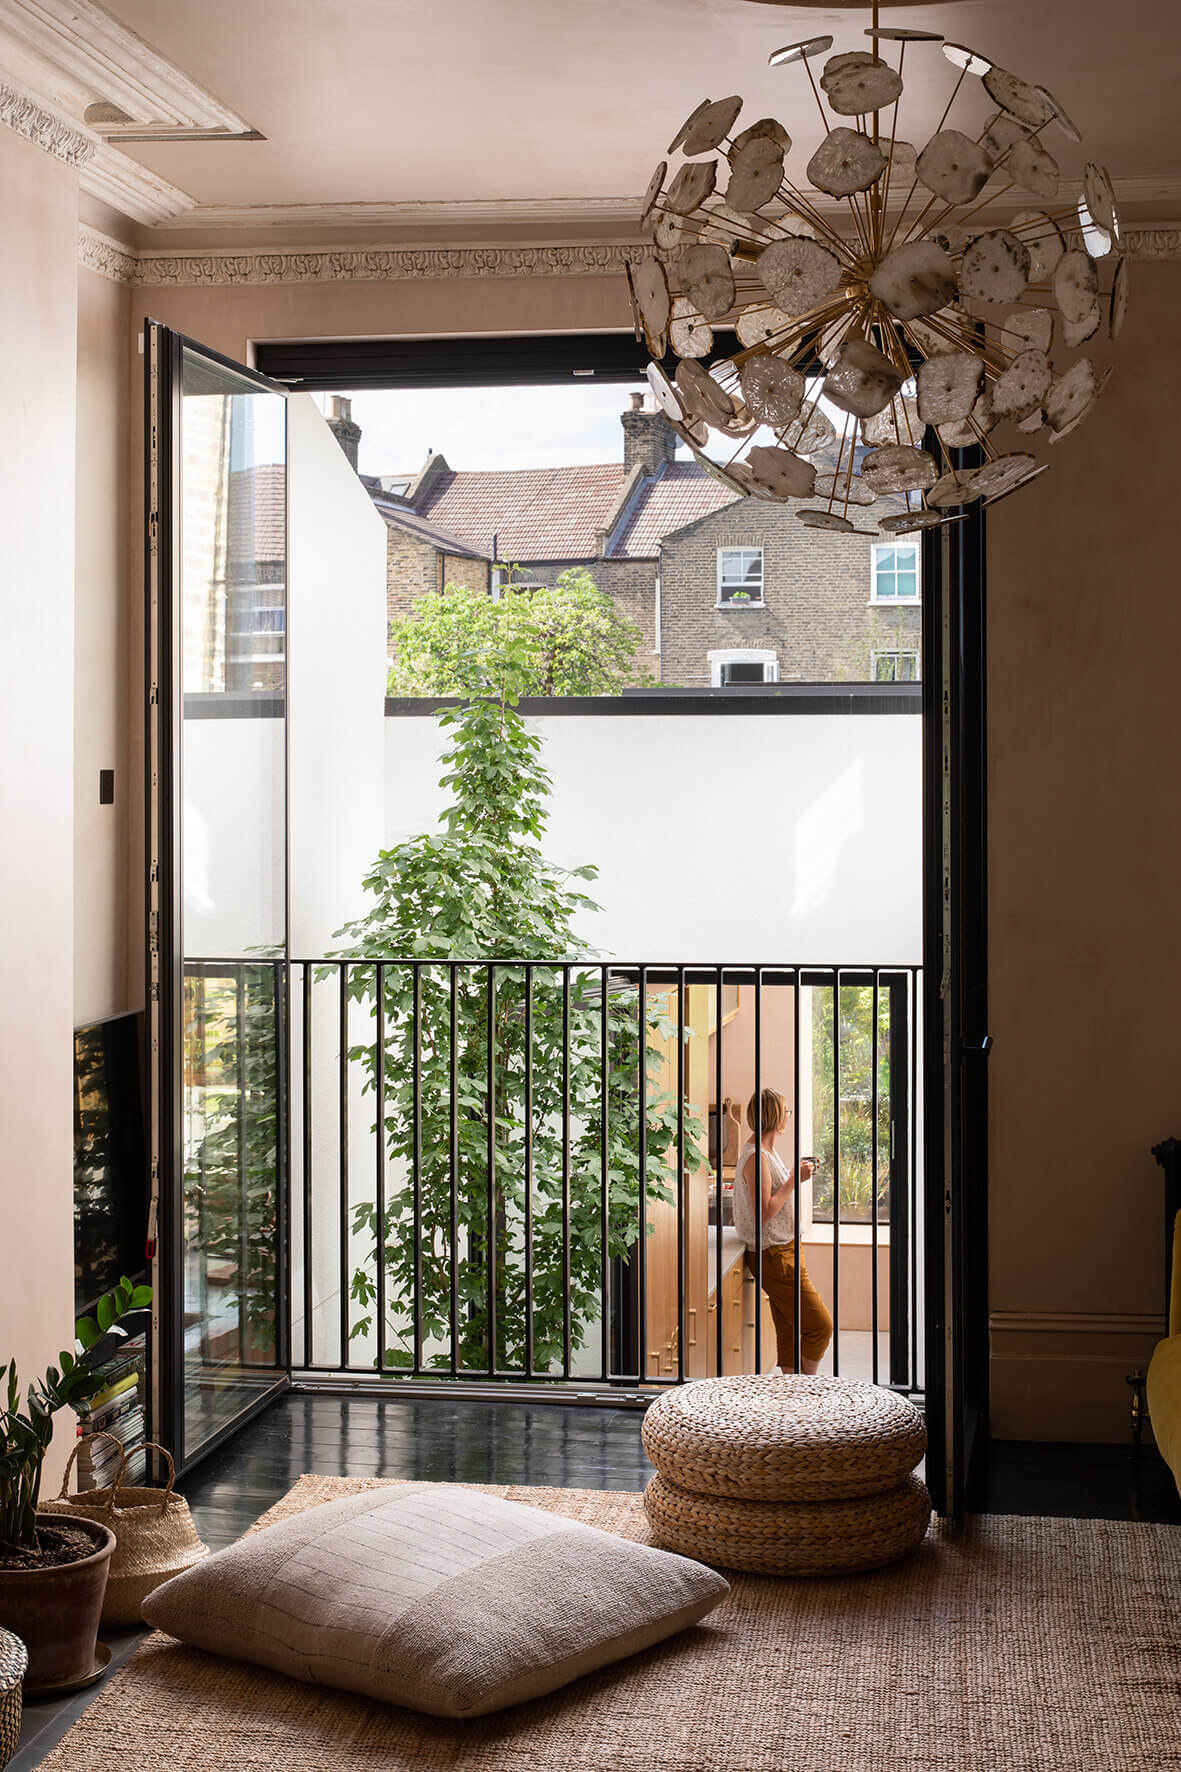 AVictorianHomewithAModernExtensionandTinyJapanese StyleCourtyard TheNordroom15 A Victorian Home with A Modern Extension and Tiny Japanese-Style Courtyard